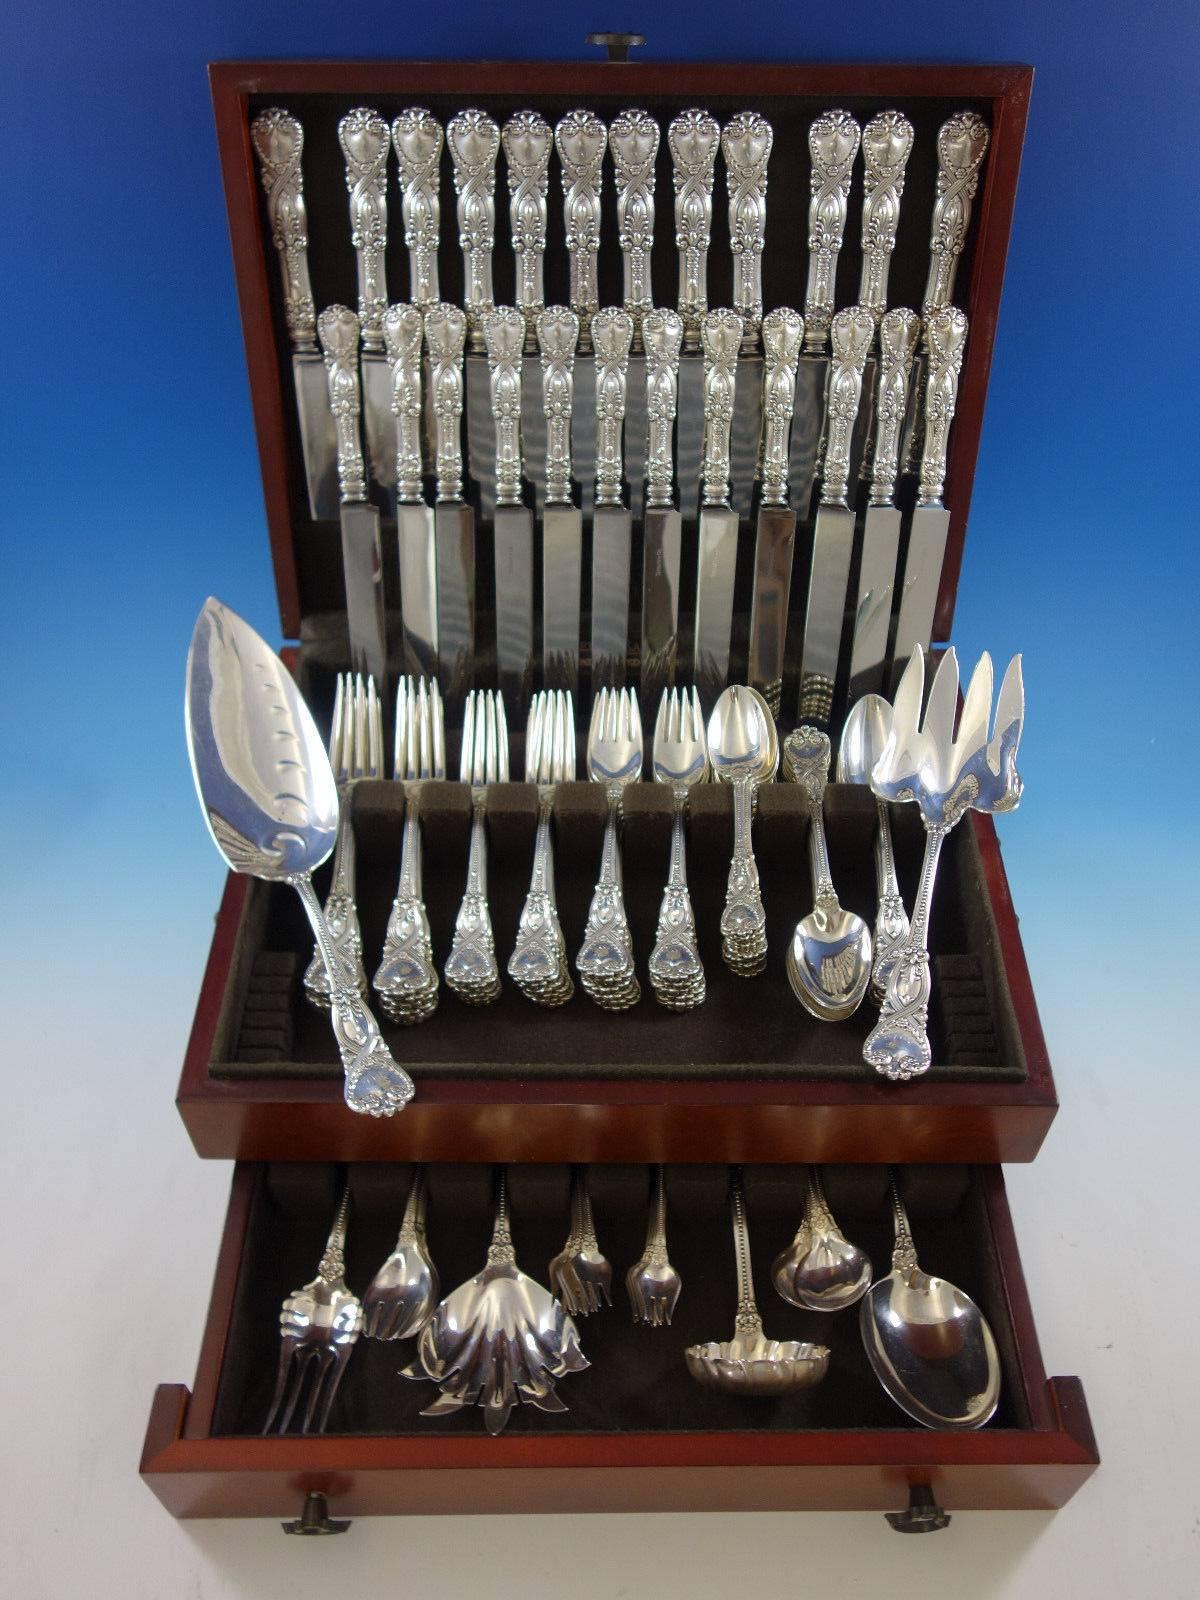 Dinner and luncheon size Saint James by Tiffany & Co. sterling silver flatware set of 115 pieces. This set includes: 

12 dinner size knives, 10 1/4